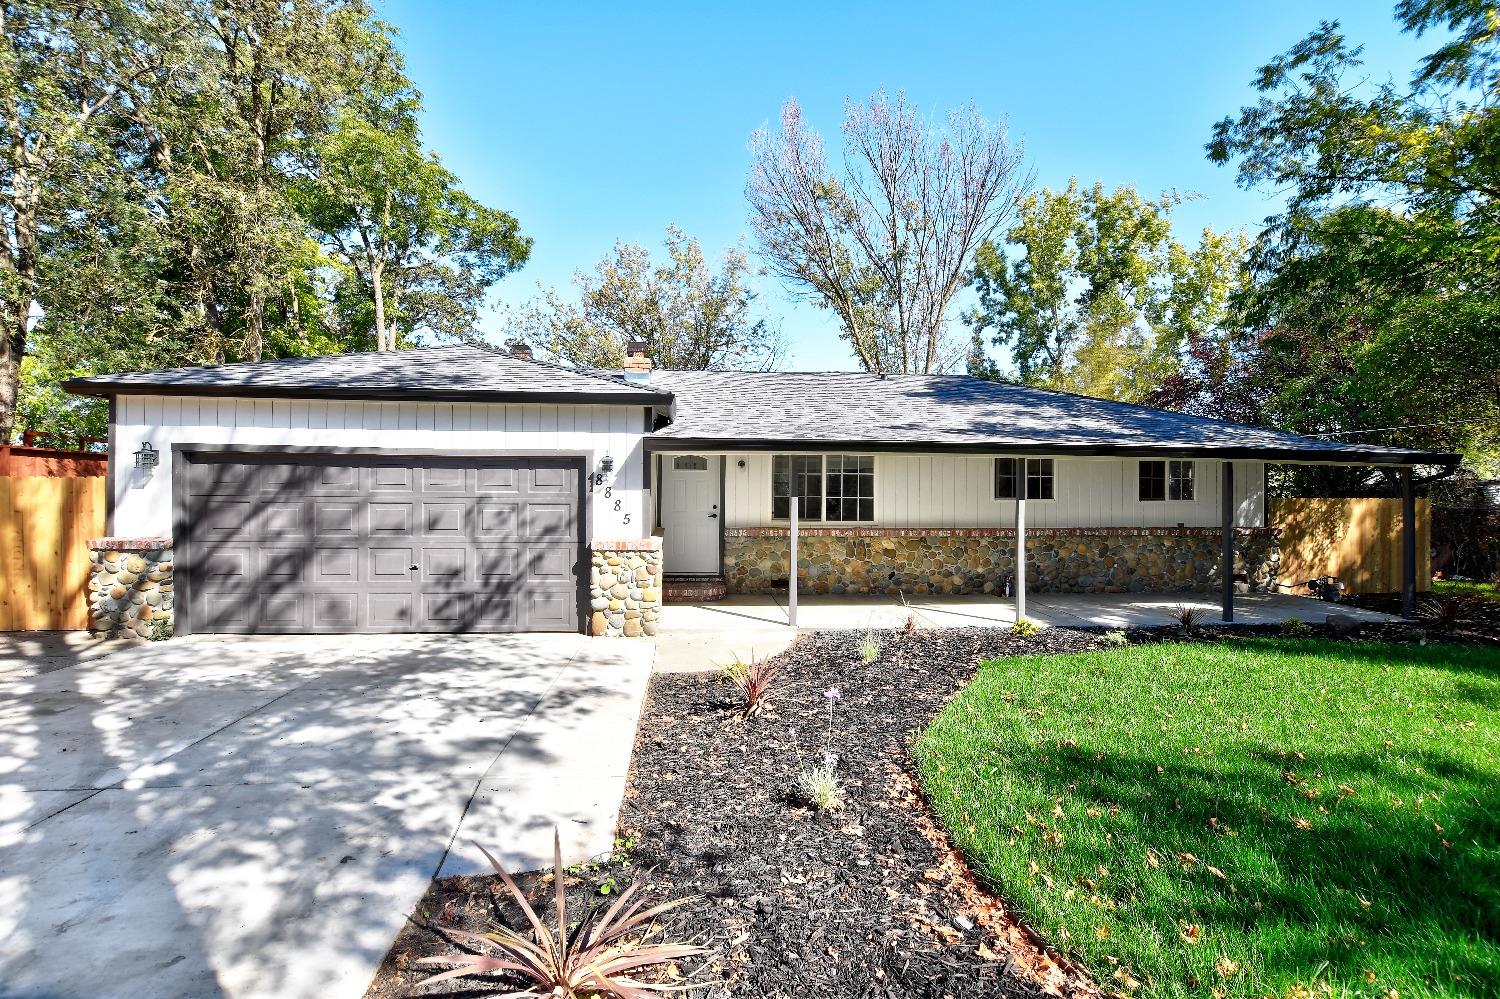 Recently RENOVATED single story, 3 bedrooms, 2 full baths, 2 car garage home in Orangevale. Open flo